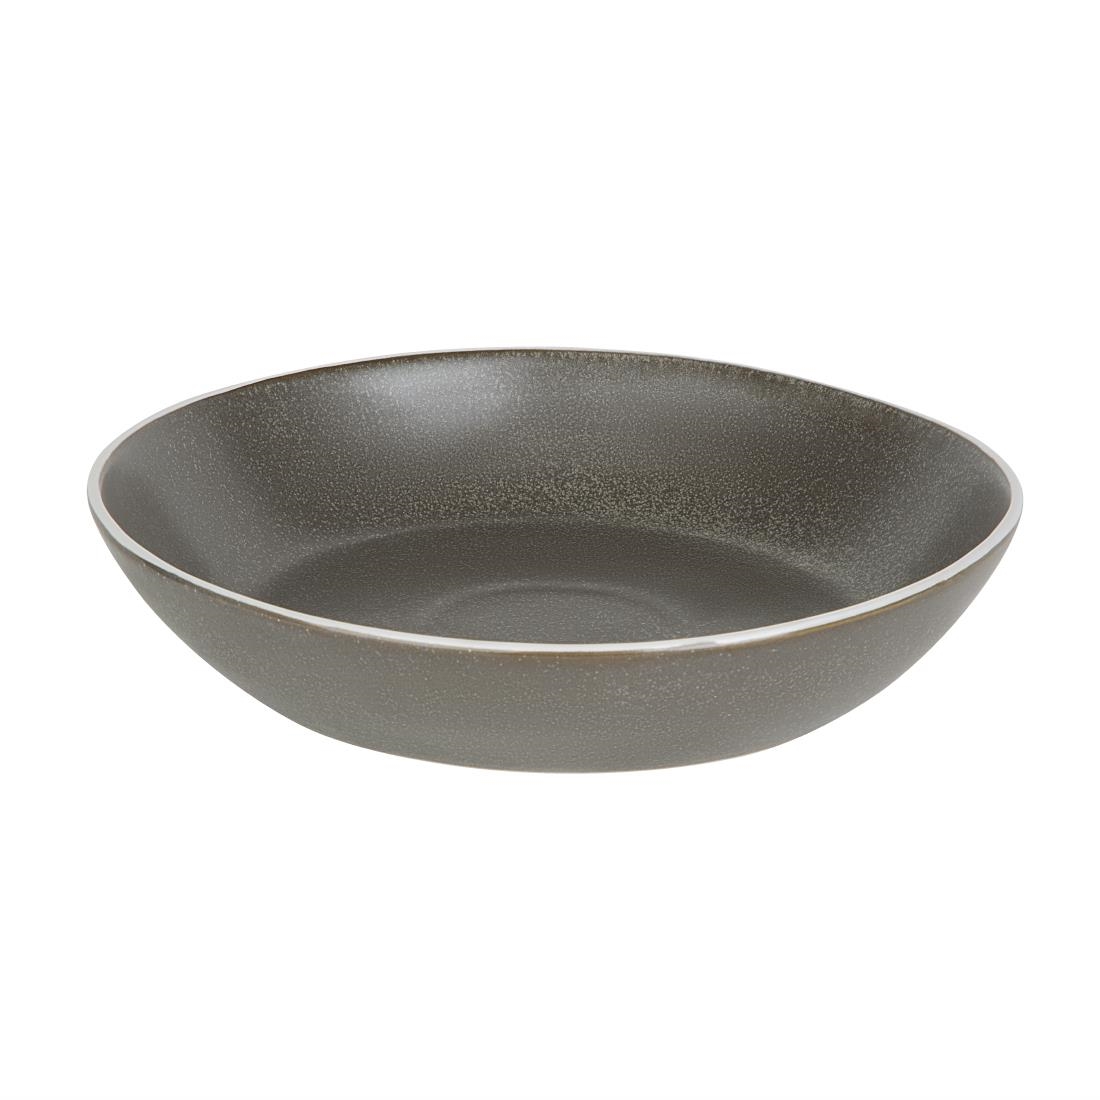 Olympia Chia Charcoal Coupe Bowl 265mm 10.5